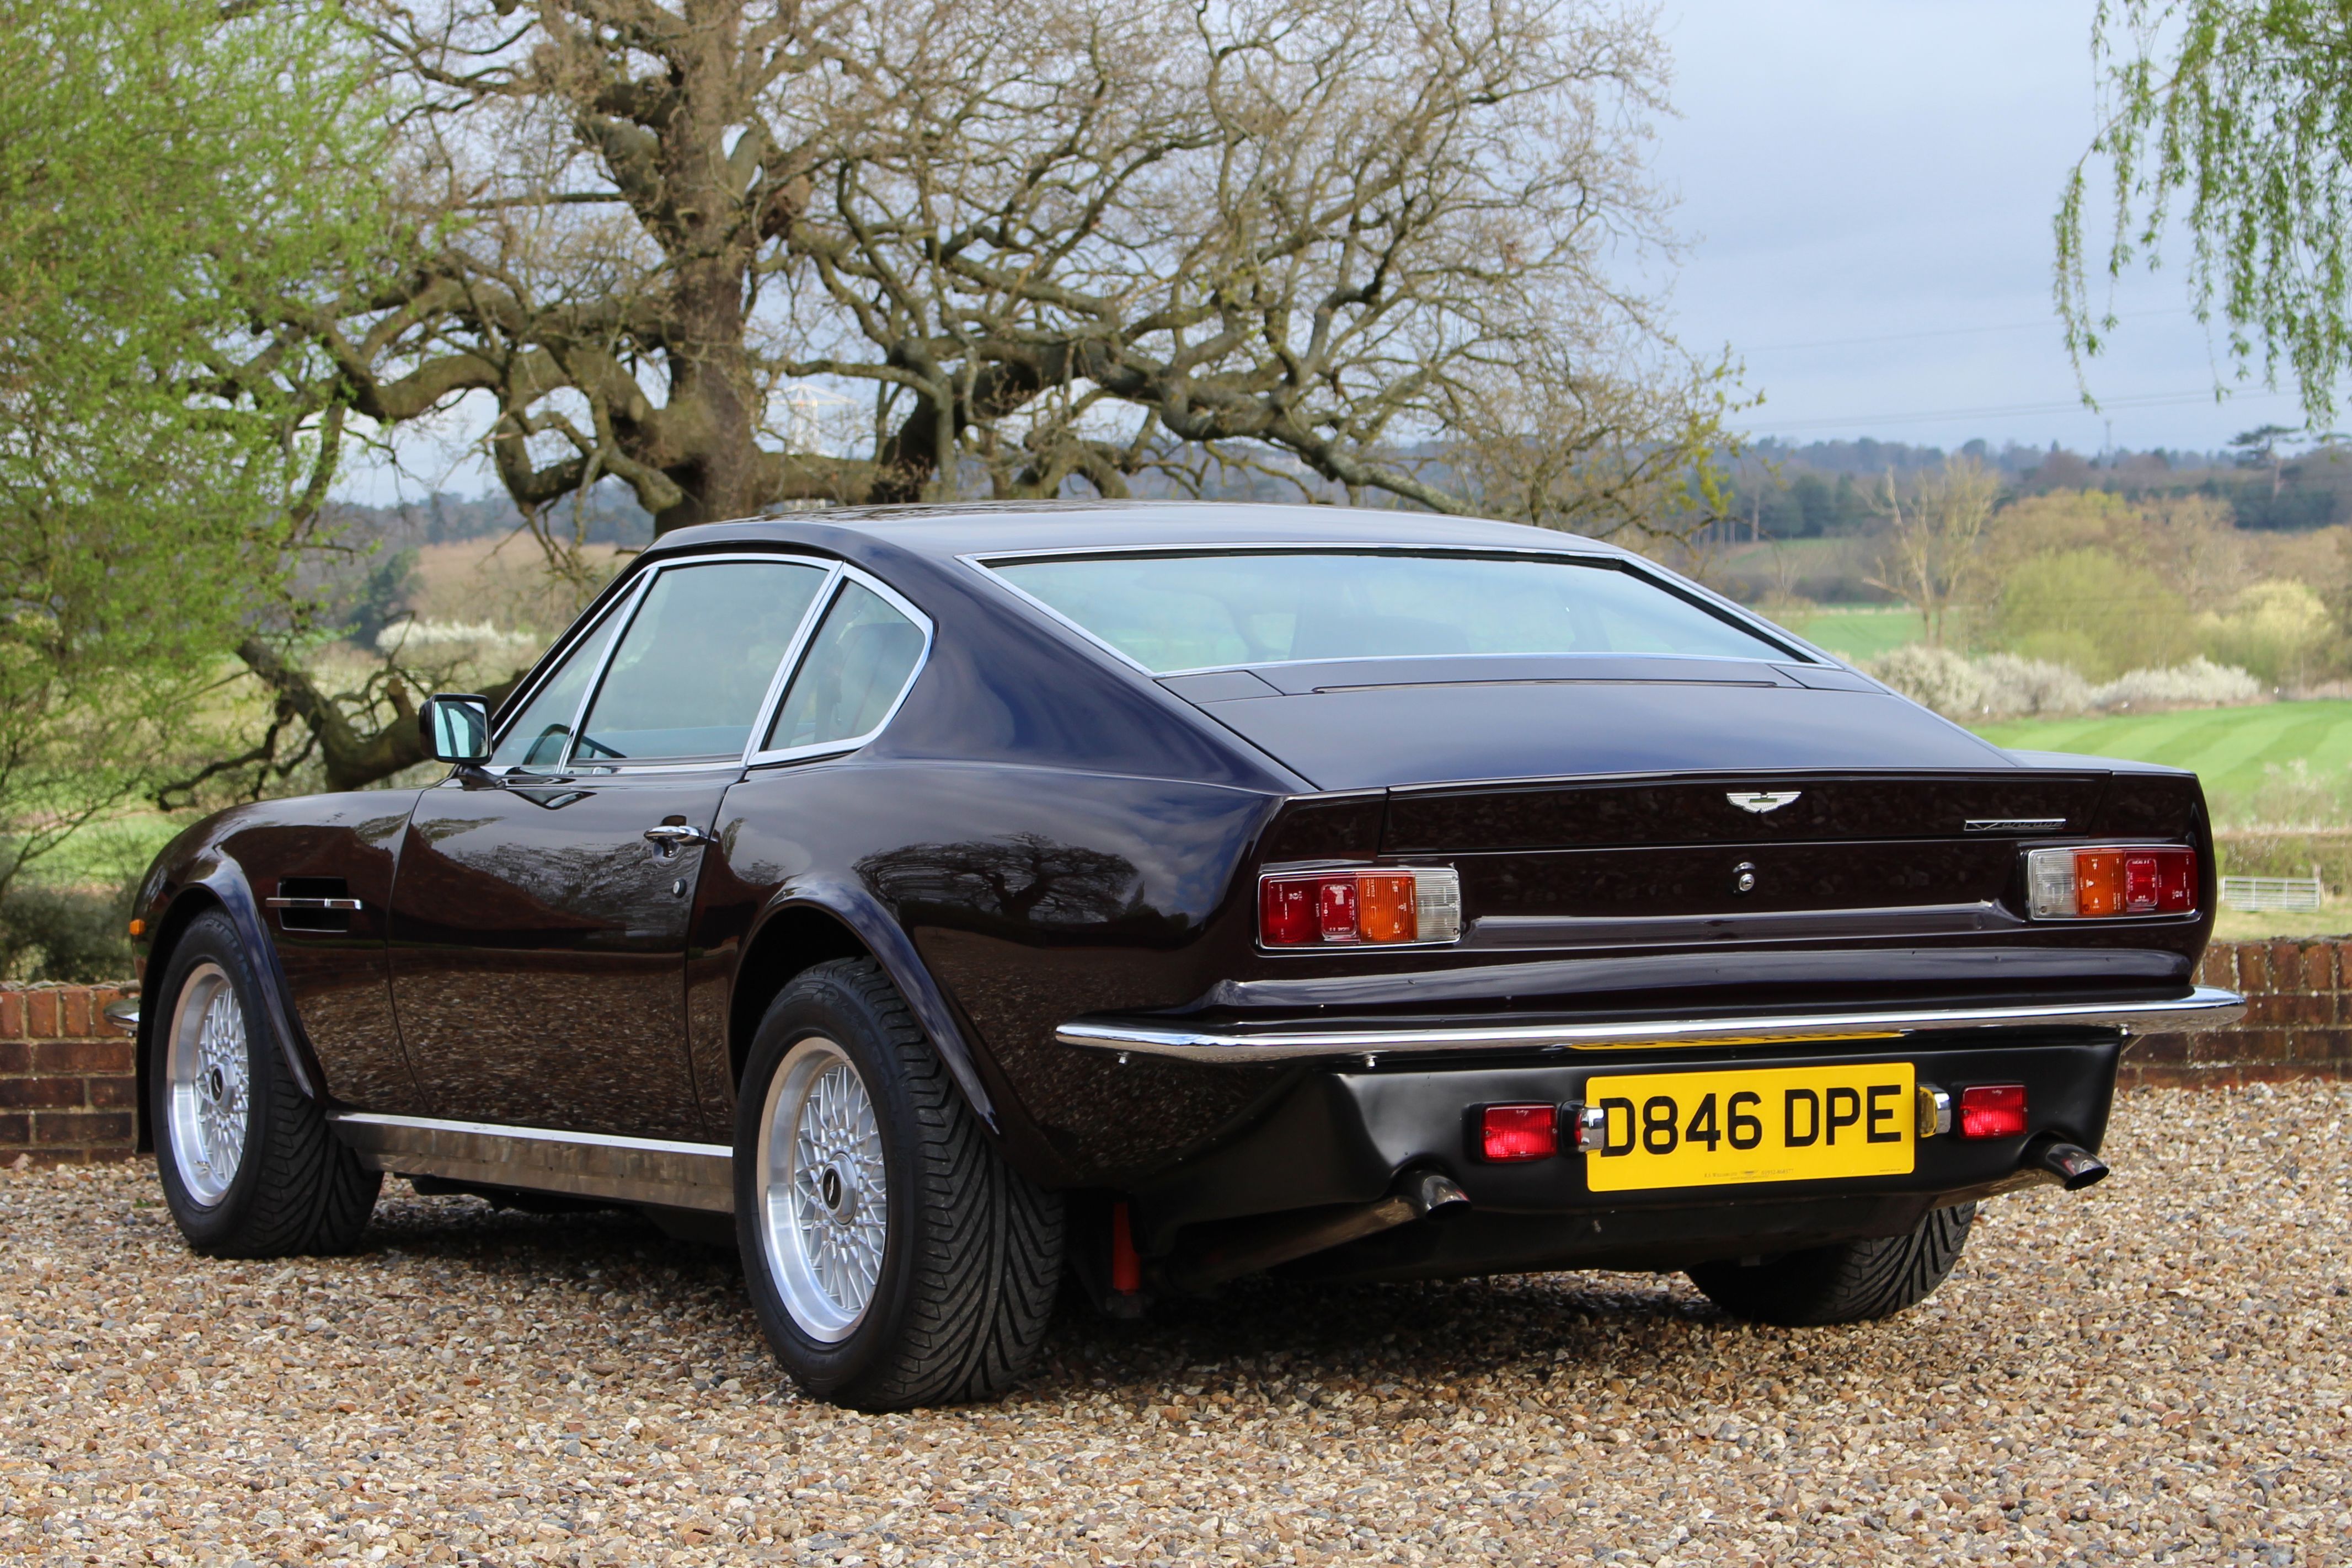 Find out how much this 1987 Aston Martin V8 Vantage is worth